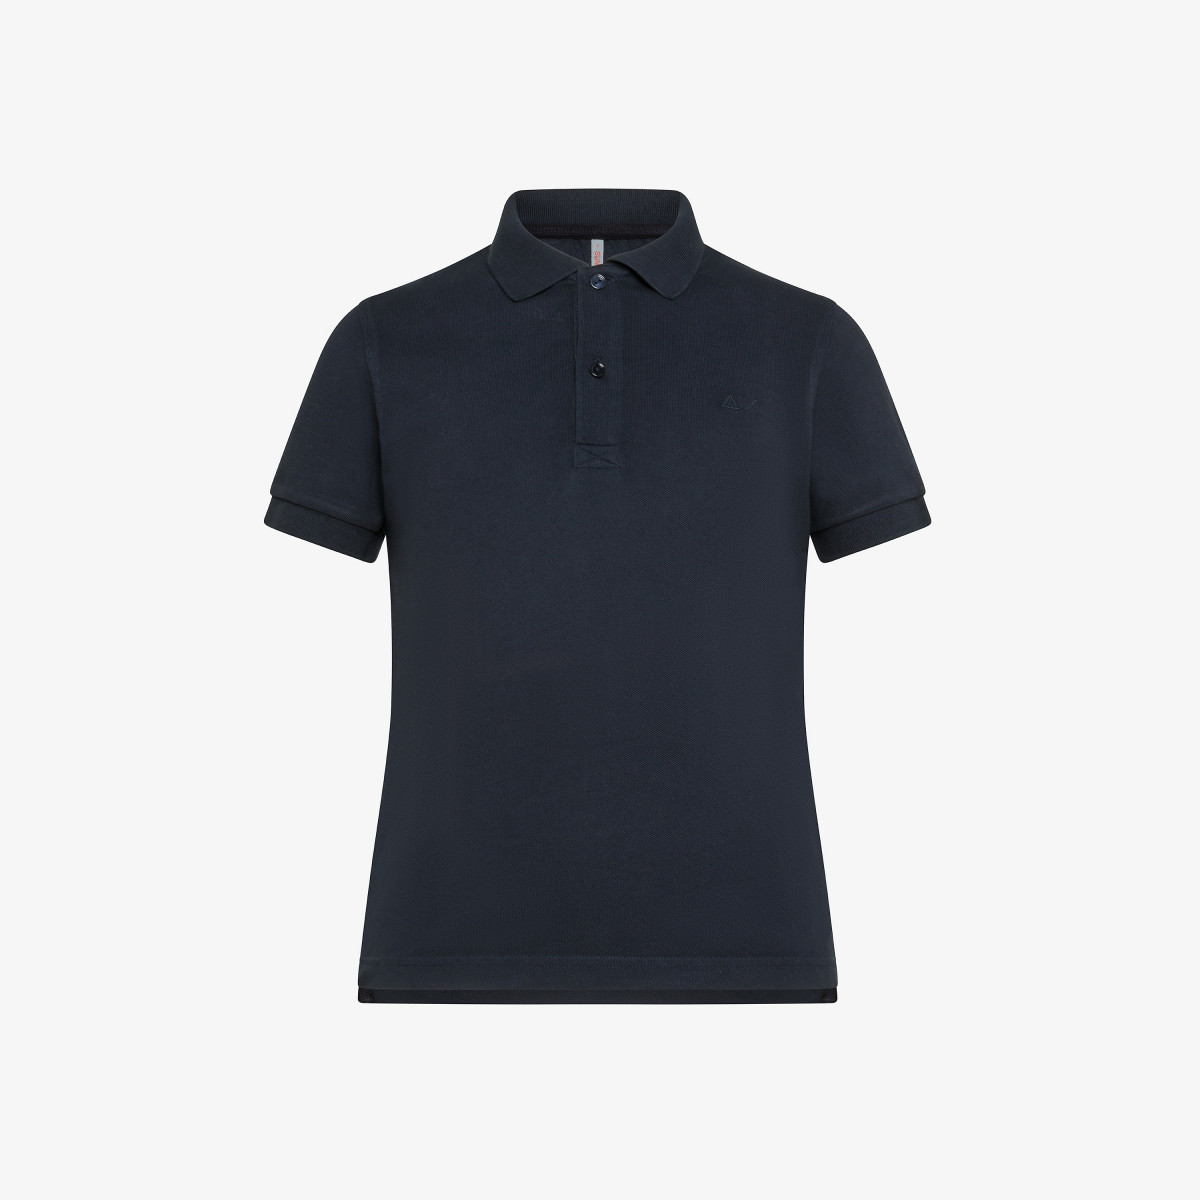 BOY'S POLO COLD DYED S/S NAVY BLUE